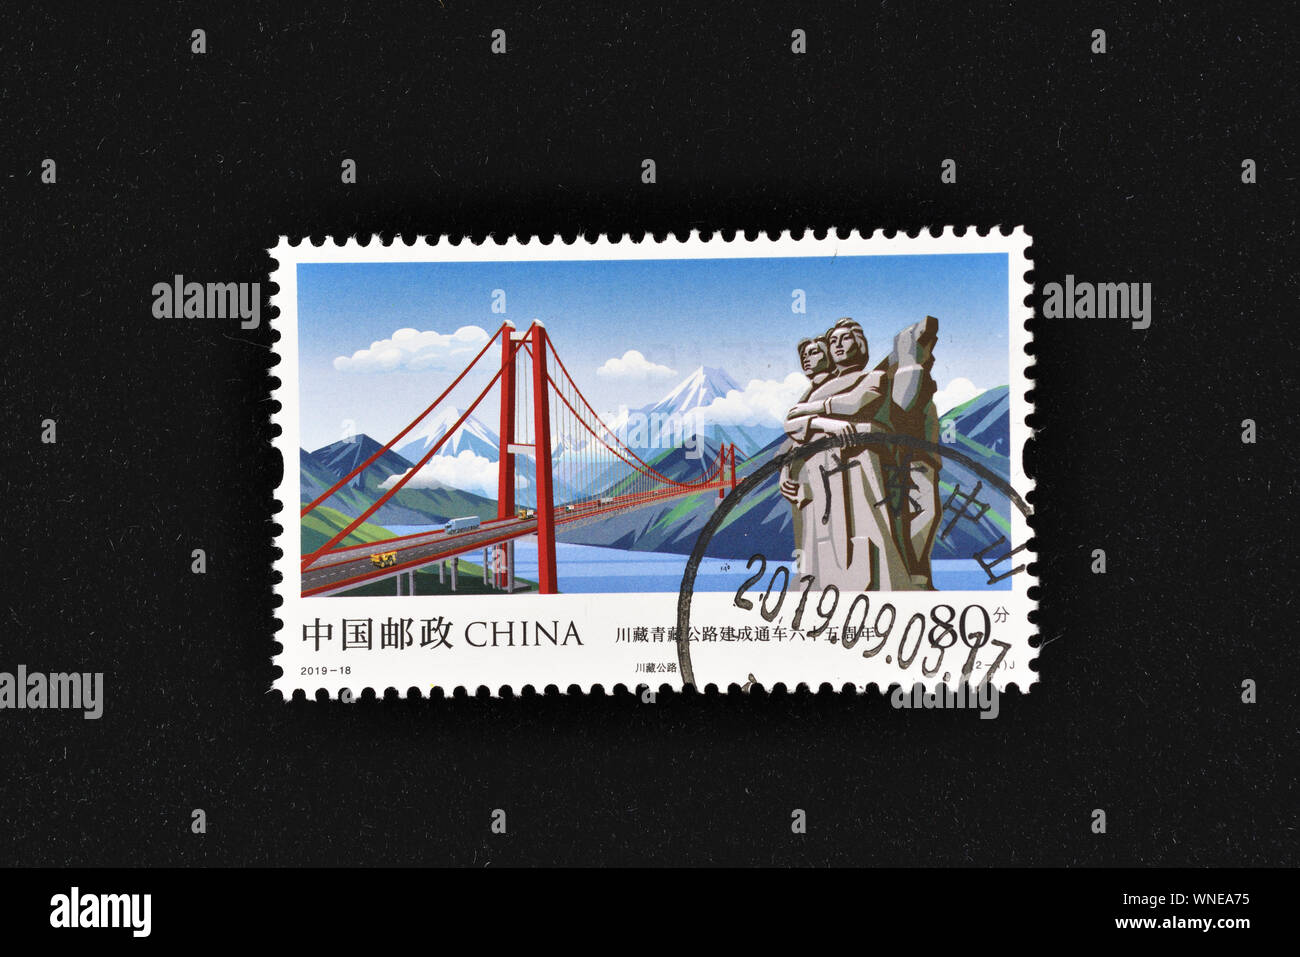 CHINA - CIRCA 2019: A stamps printed in China shows 2019-18 65th Anniversary of Open of Sichuan-Tibet Highway and Qinghai-Tibet Highway  circa 2019. Stock Photo